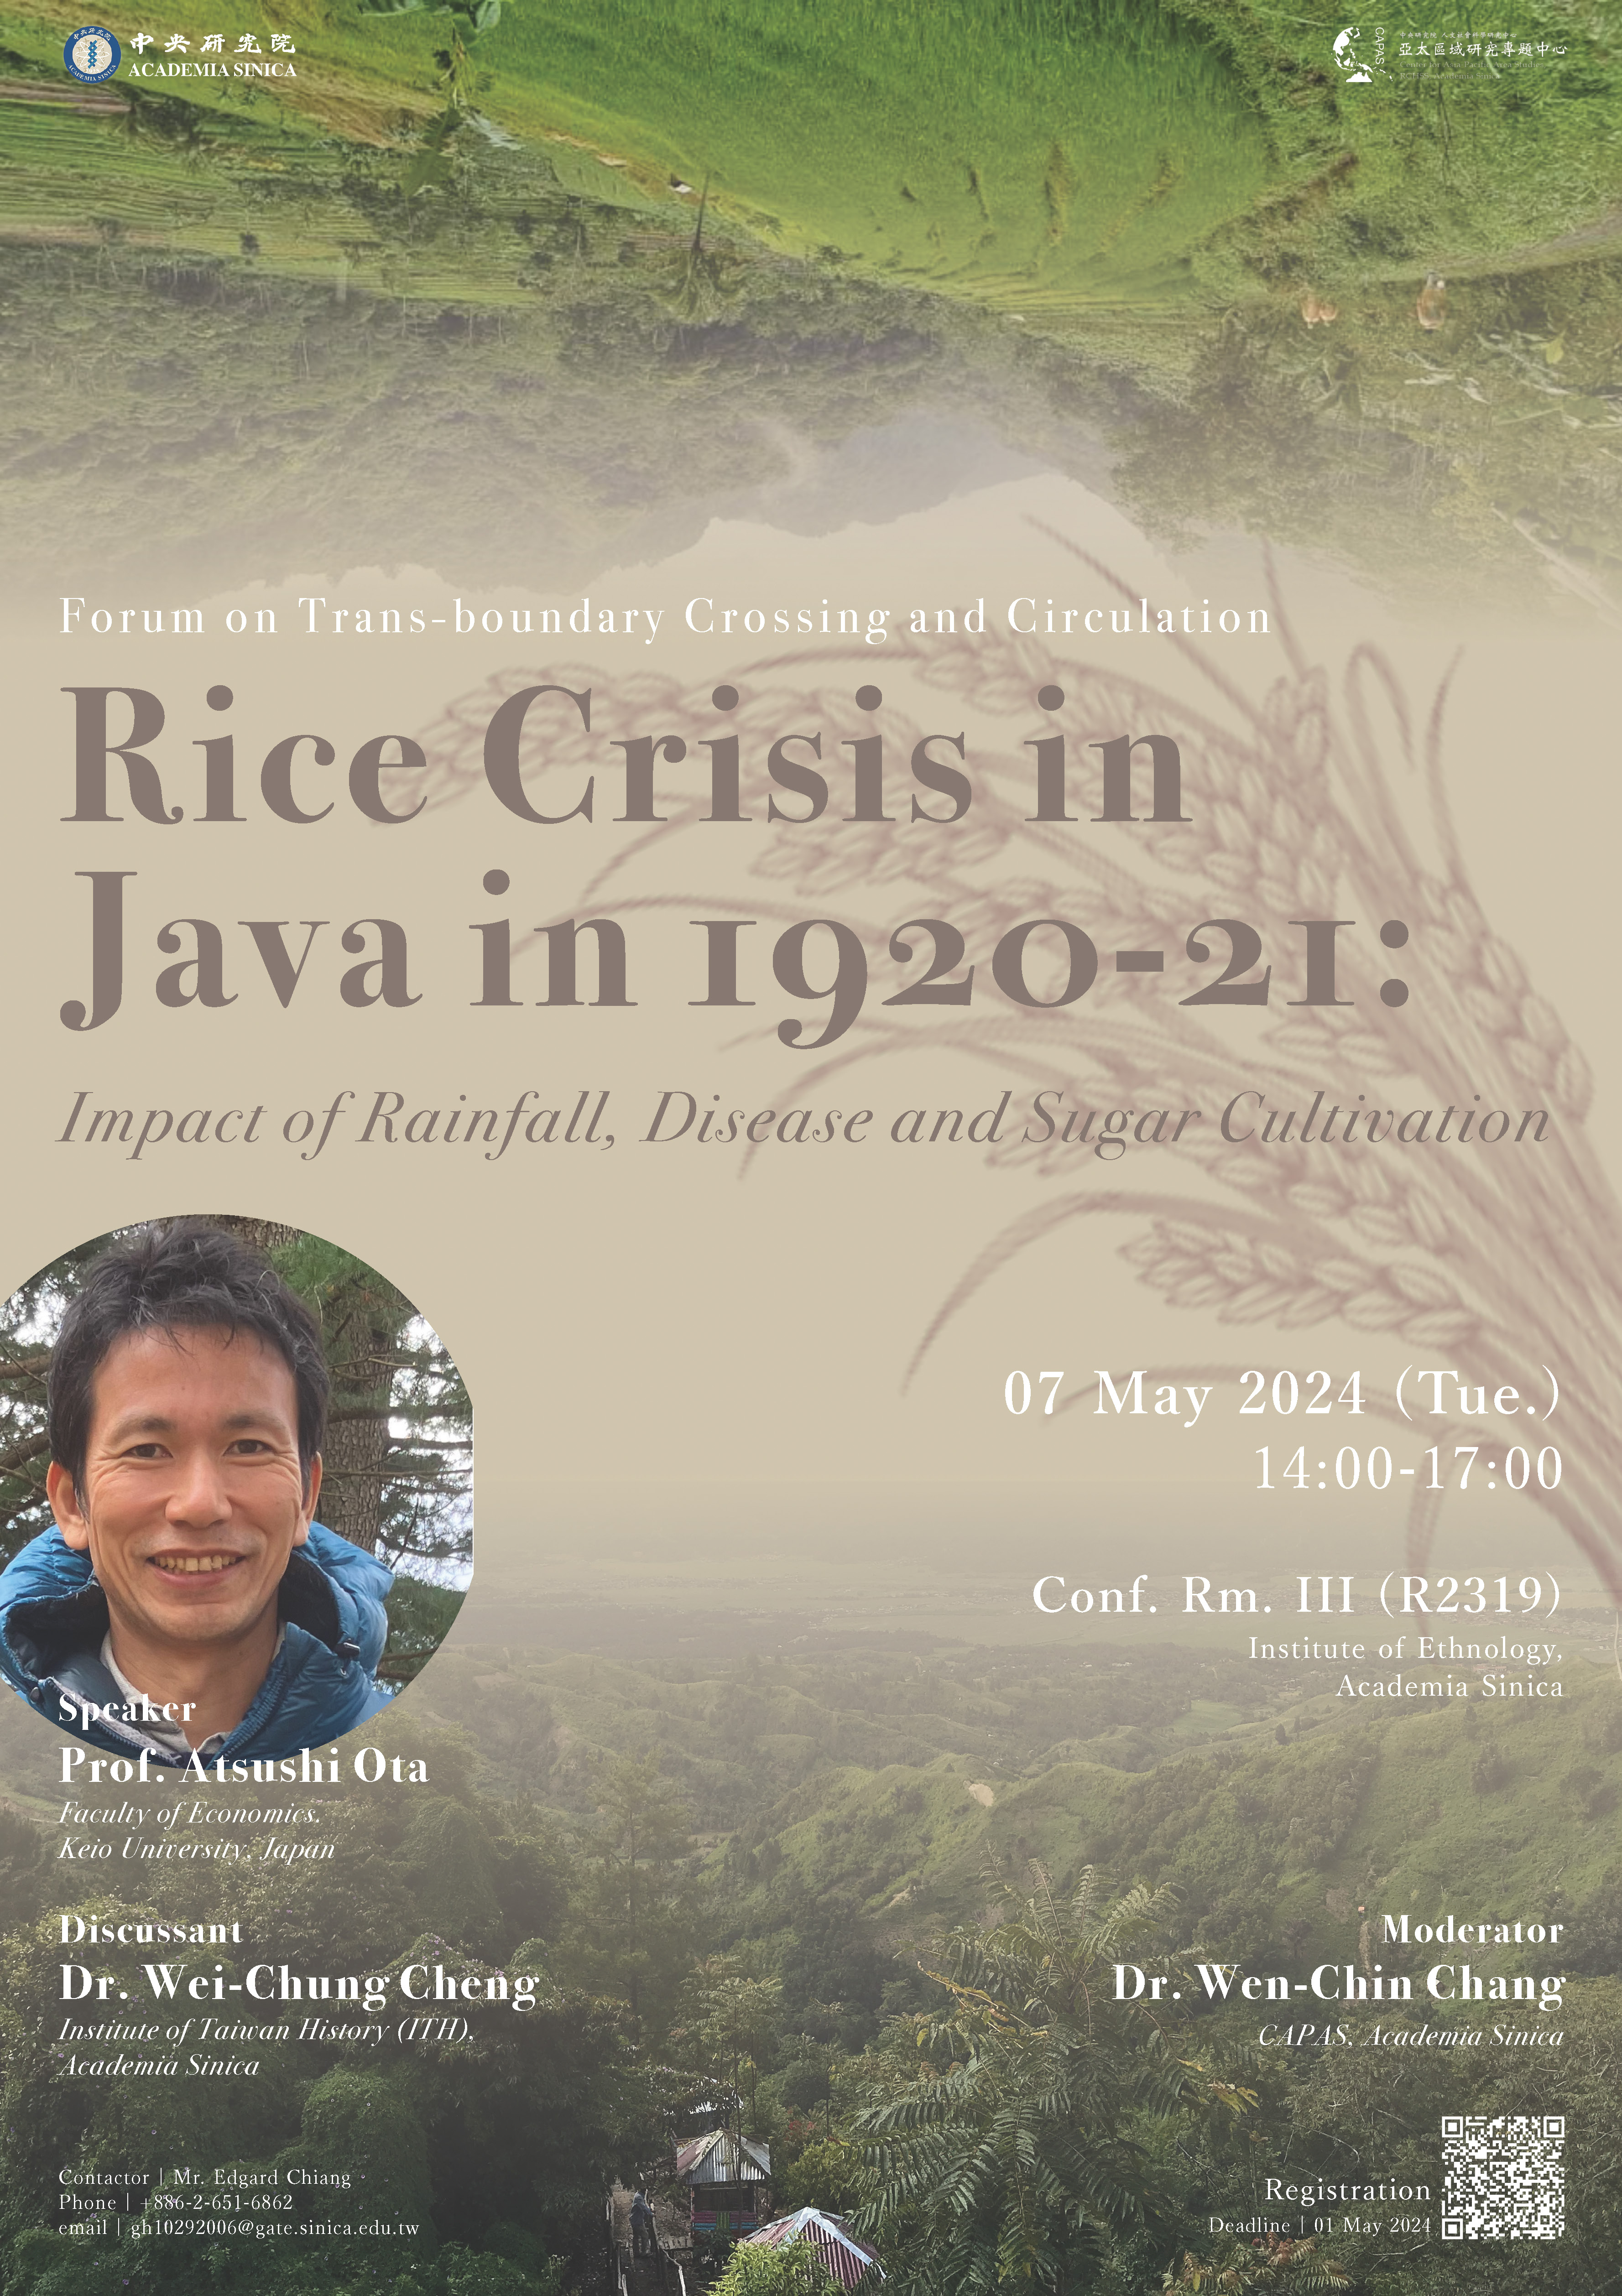 CAPAS— 2024 Forum on Trans-Boundary Crossing and Circulation：「Rice Crisis in Java in 1920-21: Impacts of Rainfall, Disease, and Sugar Cultivation」／ Prof. Atsushi Ota（Faculty of Economic, Keio University, Japan）